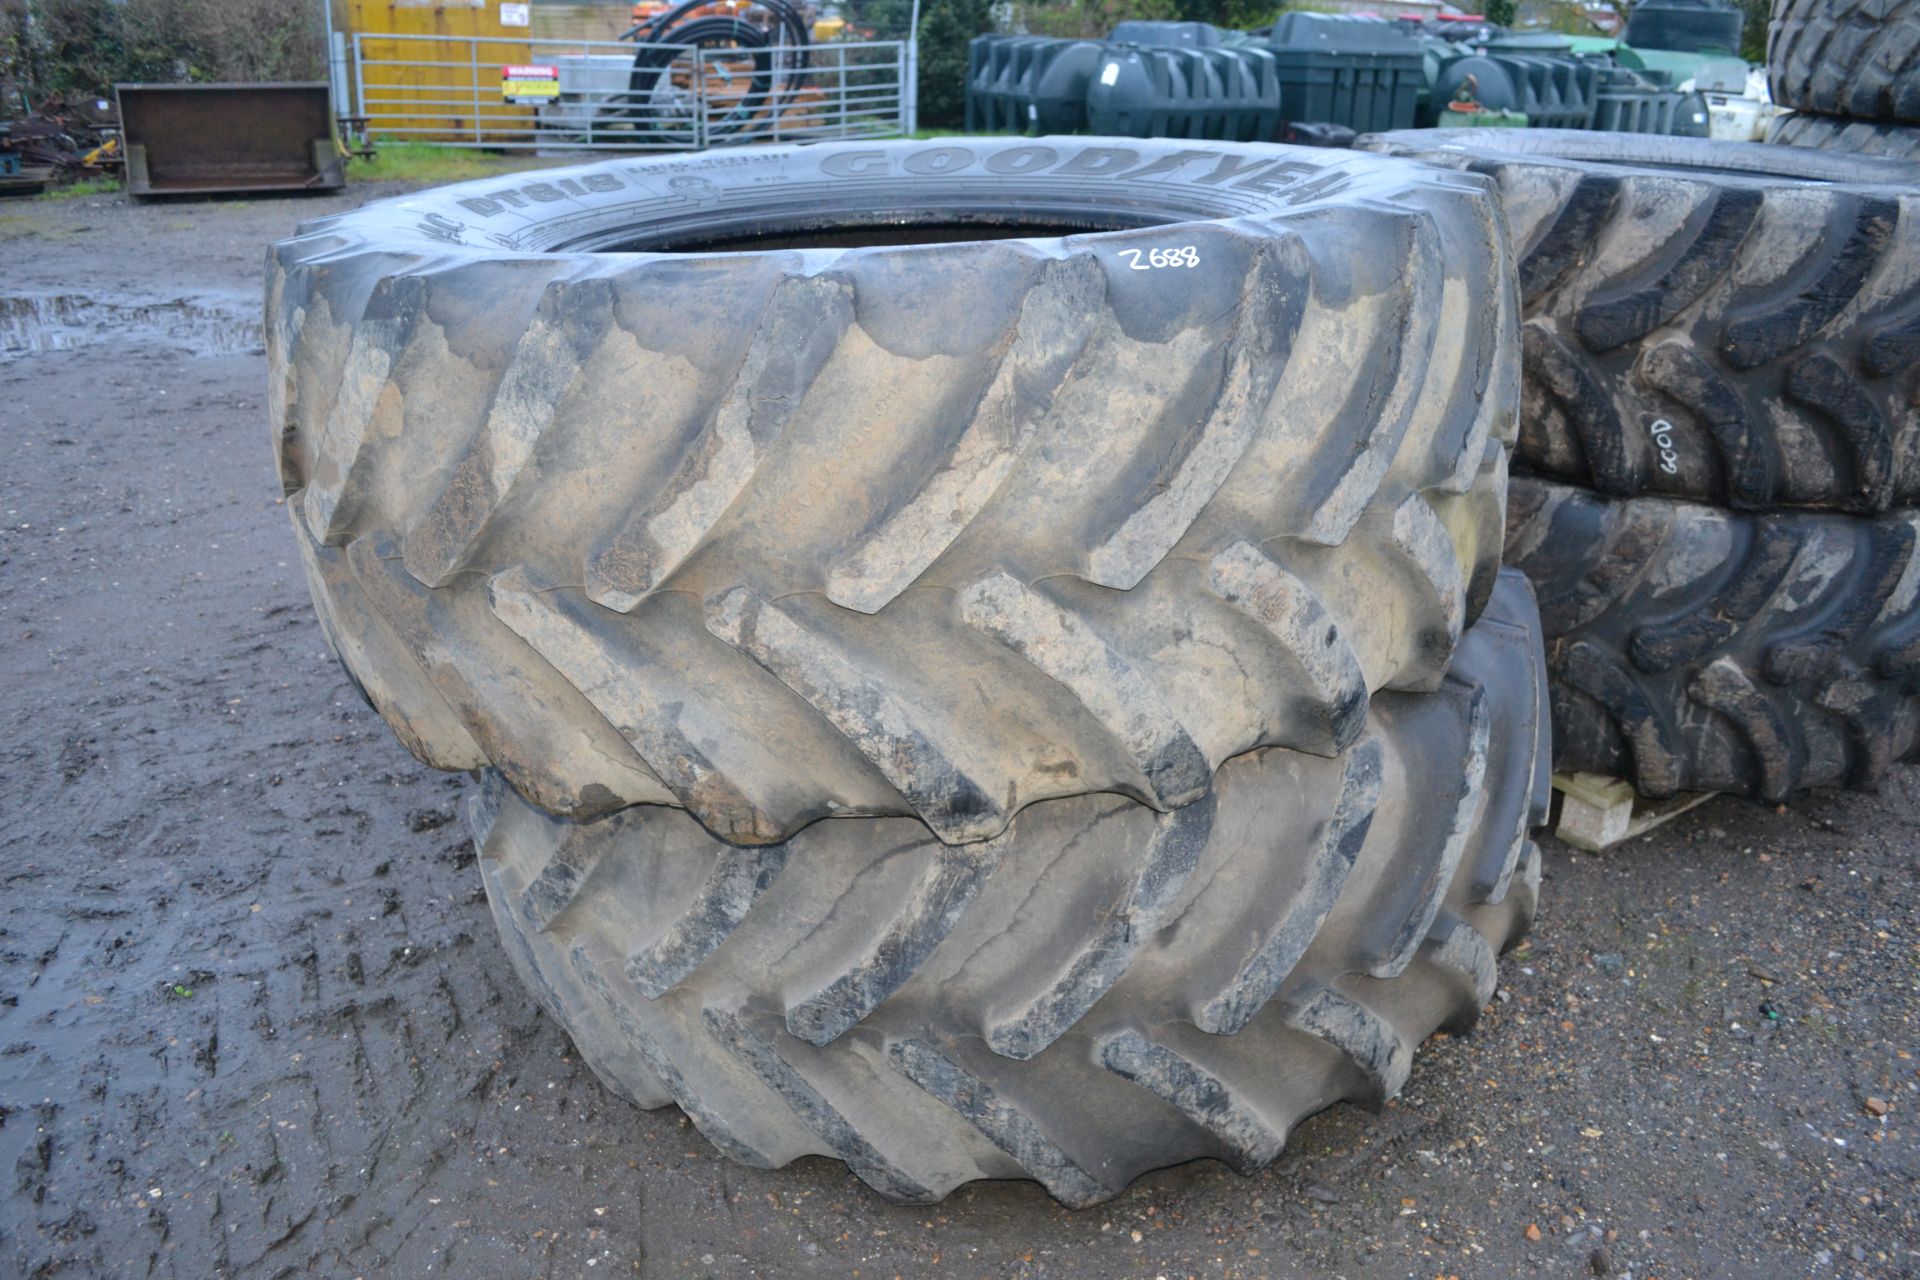 Pair of Good Year 650/65R38 tyres. V